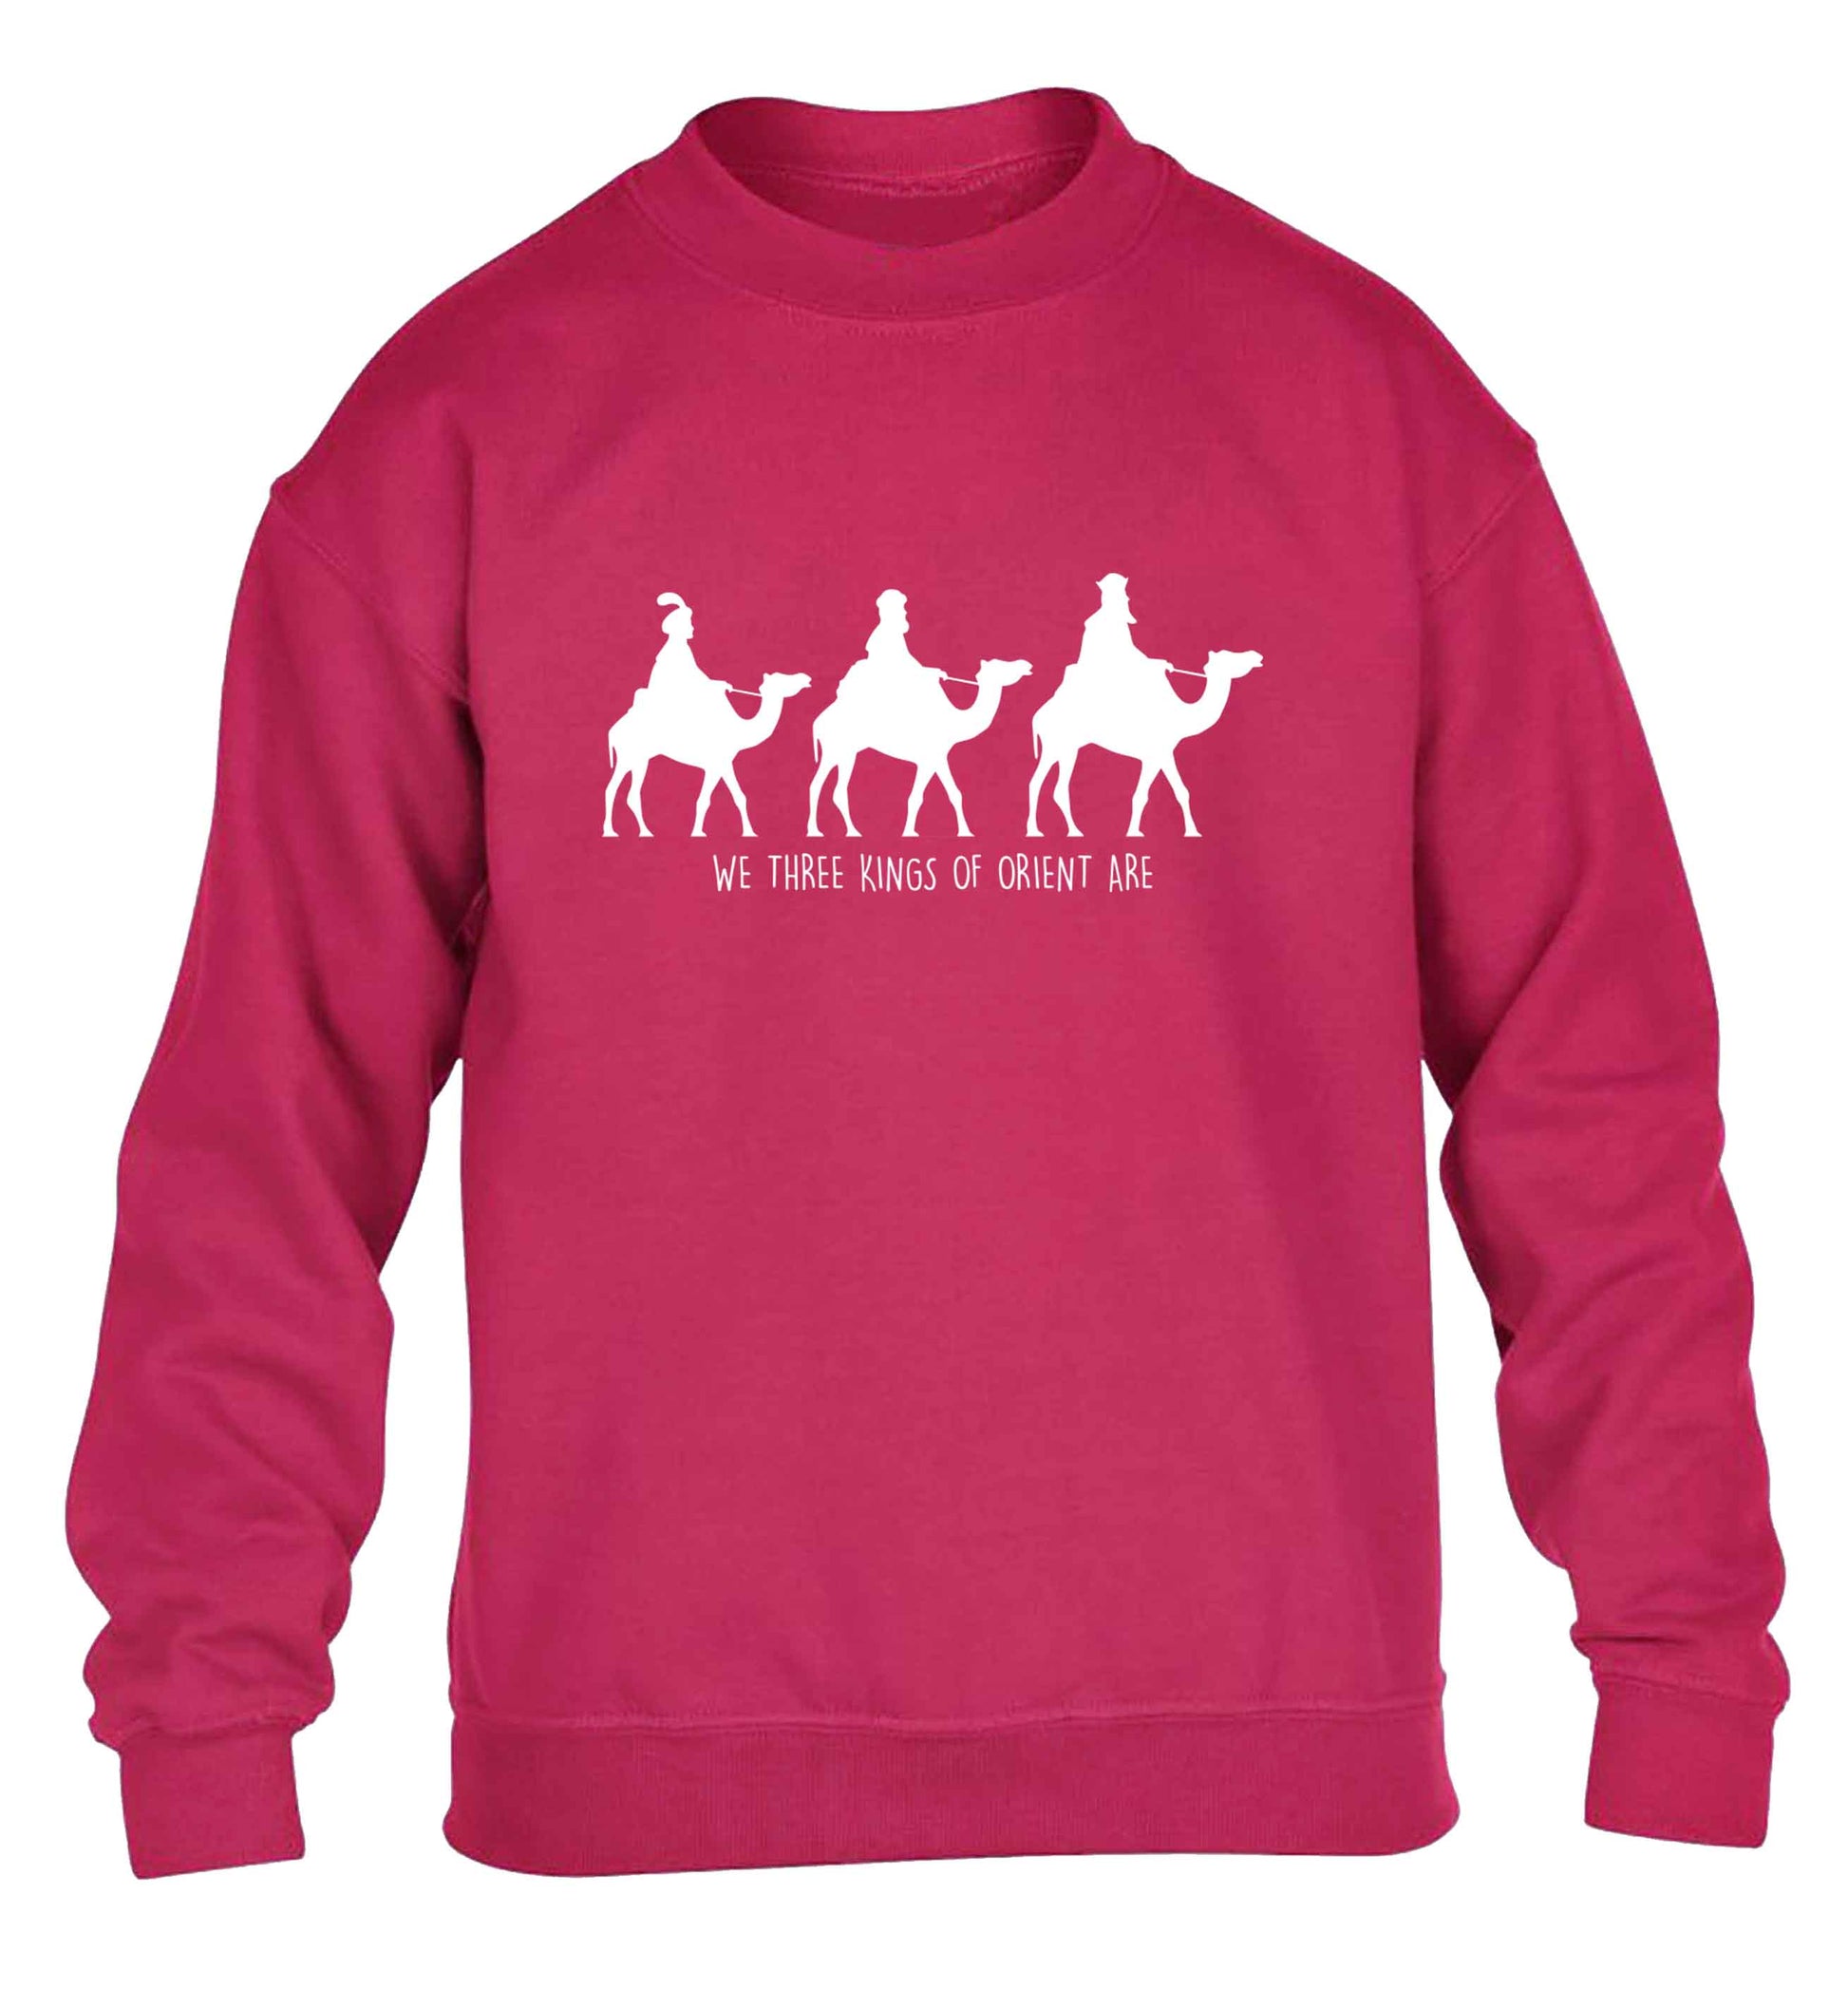 We three kings of orient are children's pink sweater 12-13 Years